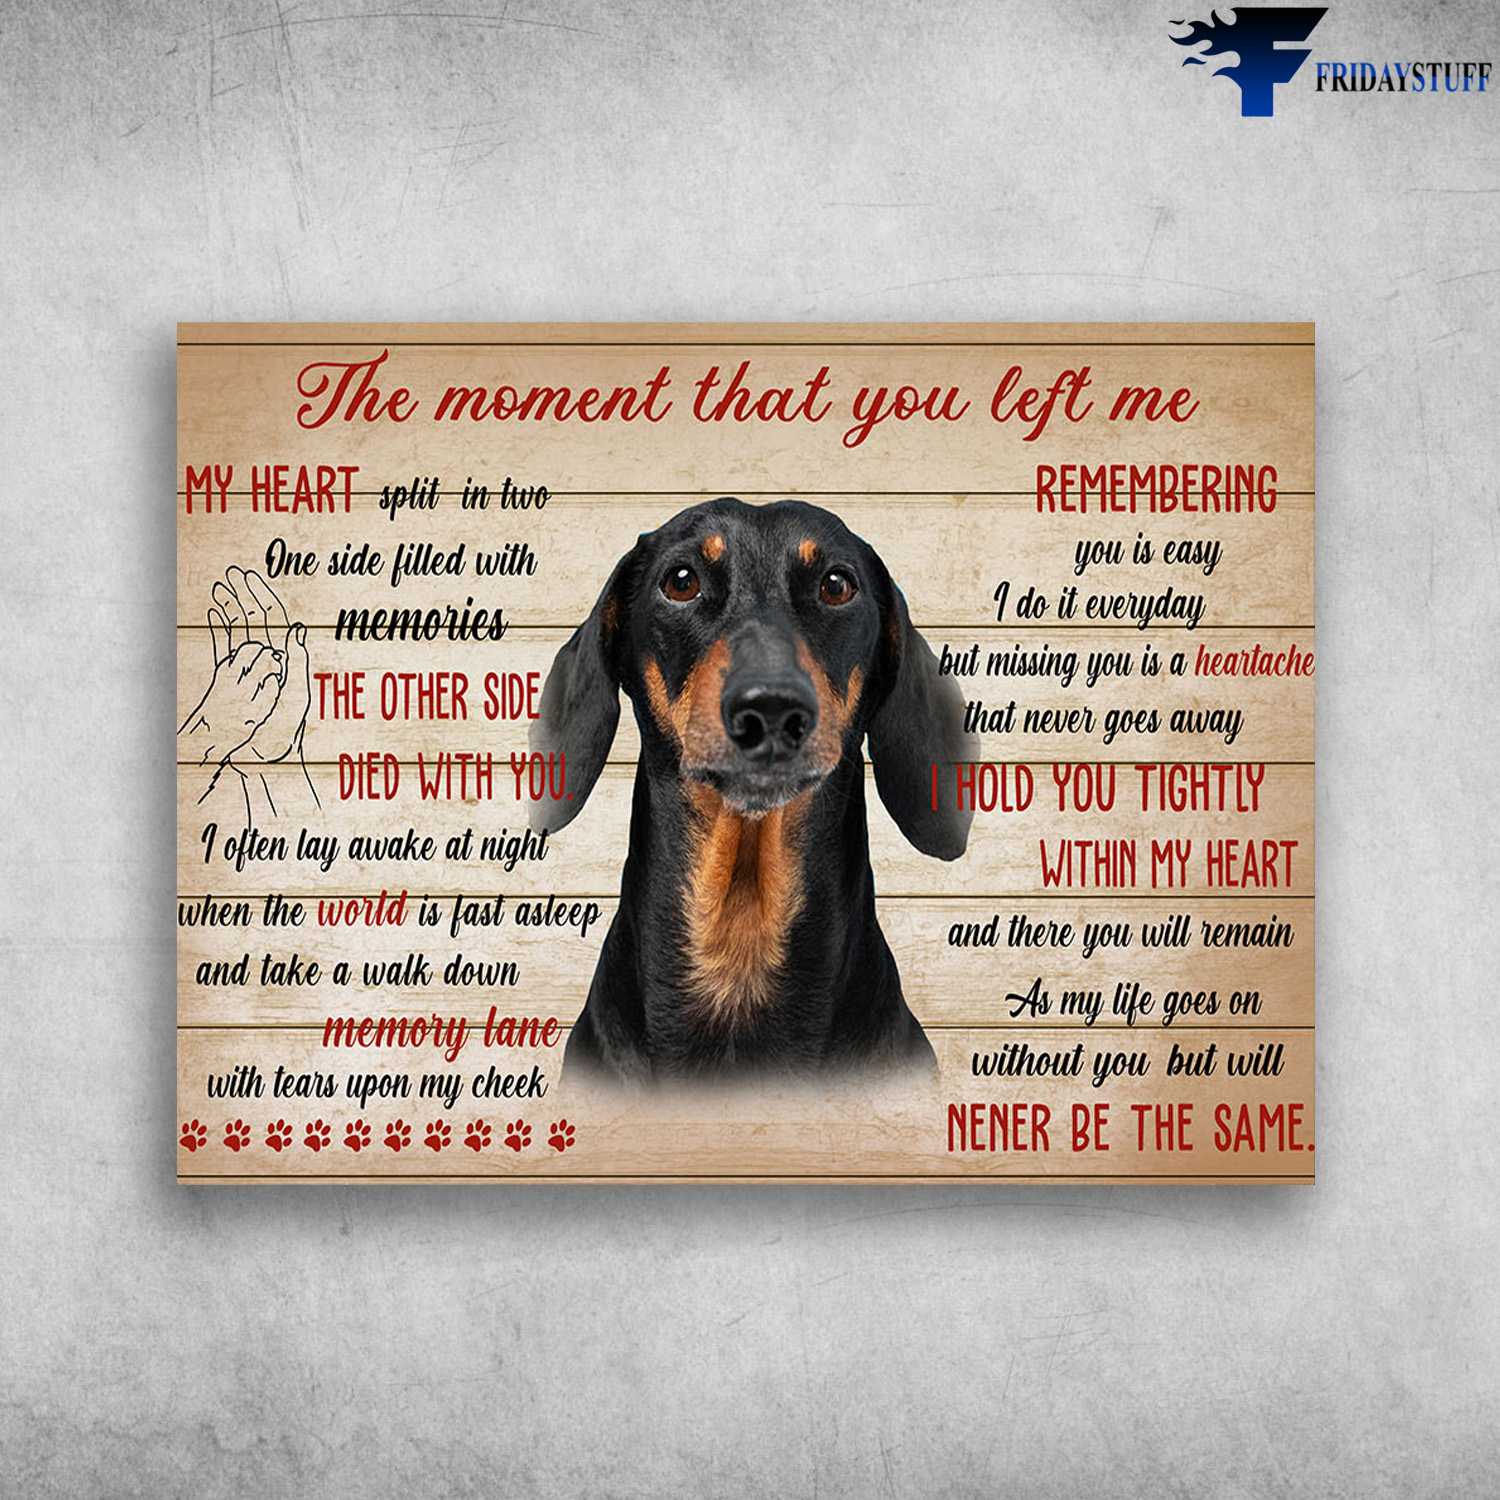 Dachshund Dog, Dog Lover - The Moment That You Left Me, My Heart Split In Two, One Side Filled With Memoties, The Other Side, Died With You, I Often Lay Awake At Night, When World Is Fast Asleep